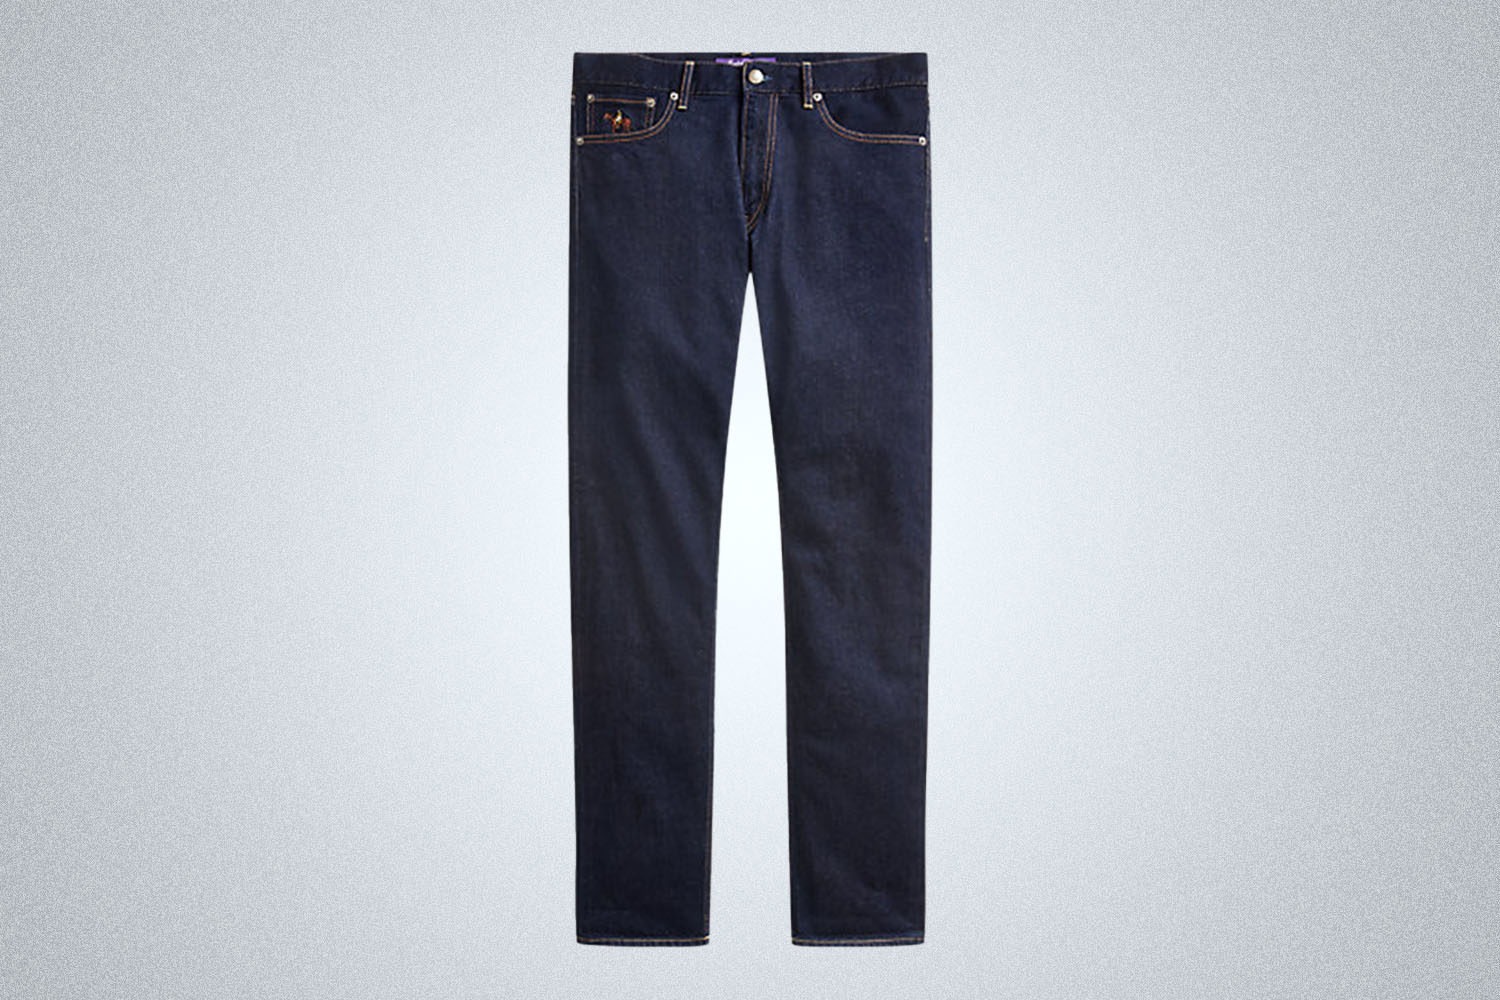 a pair of dark blue jeans from Ralph Lauren on a grey background